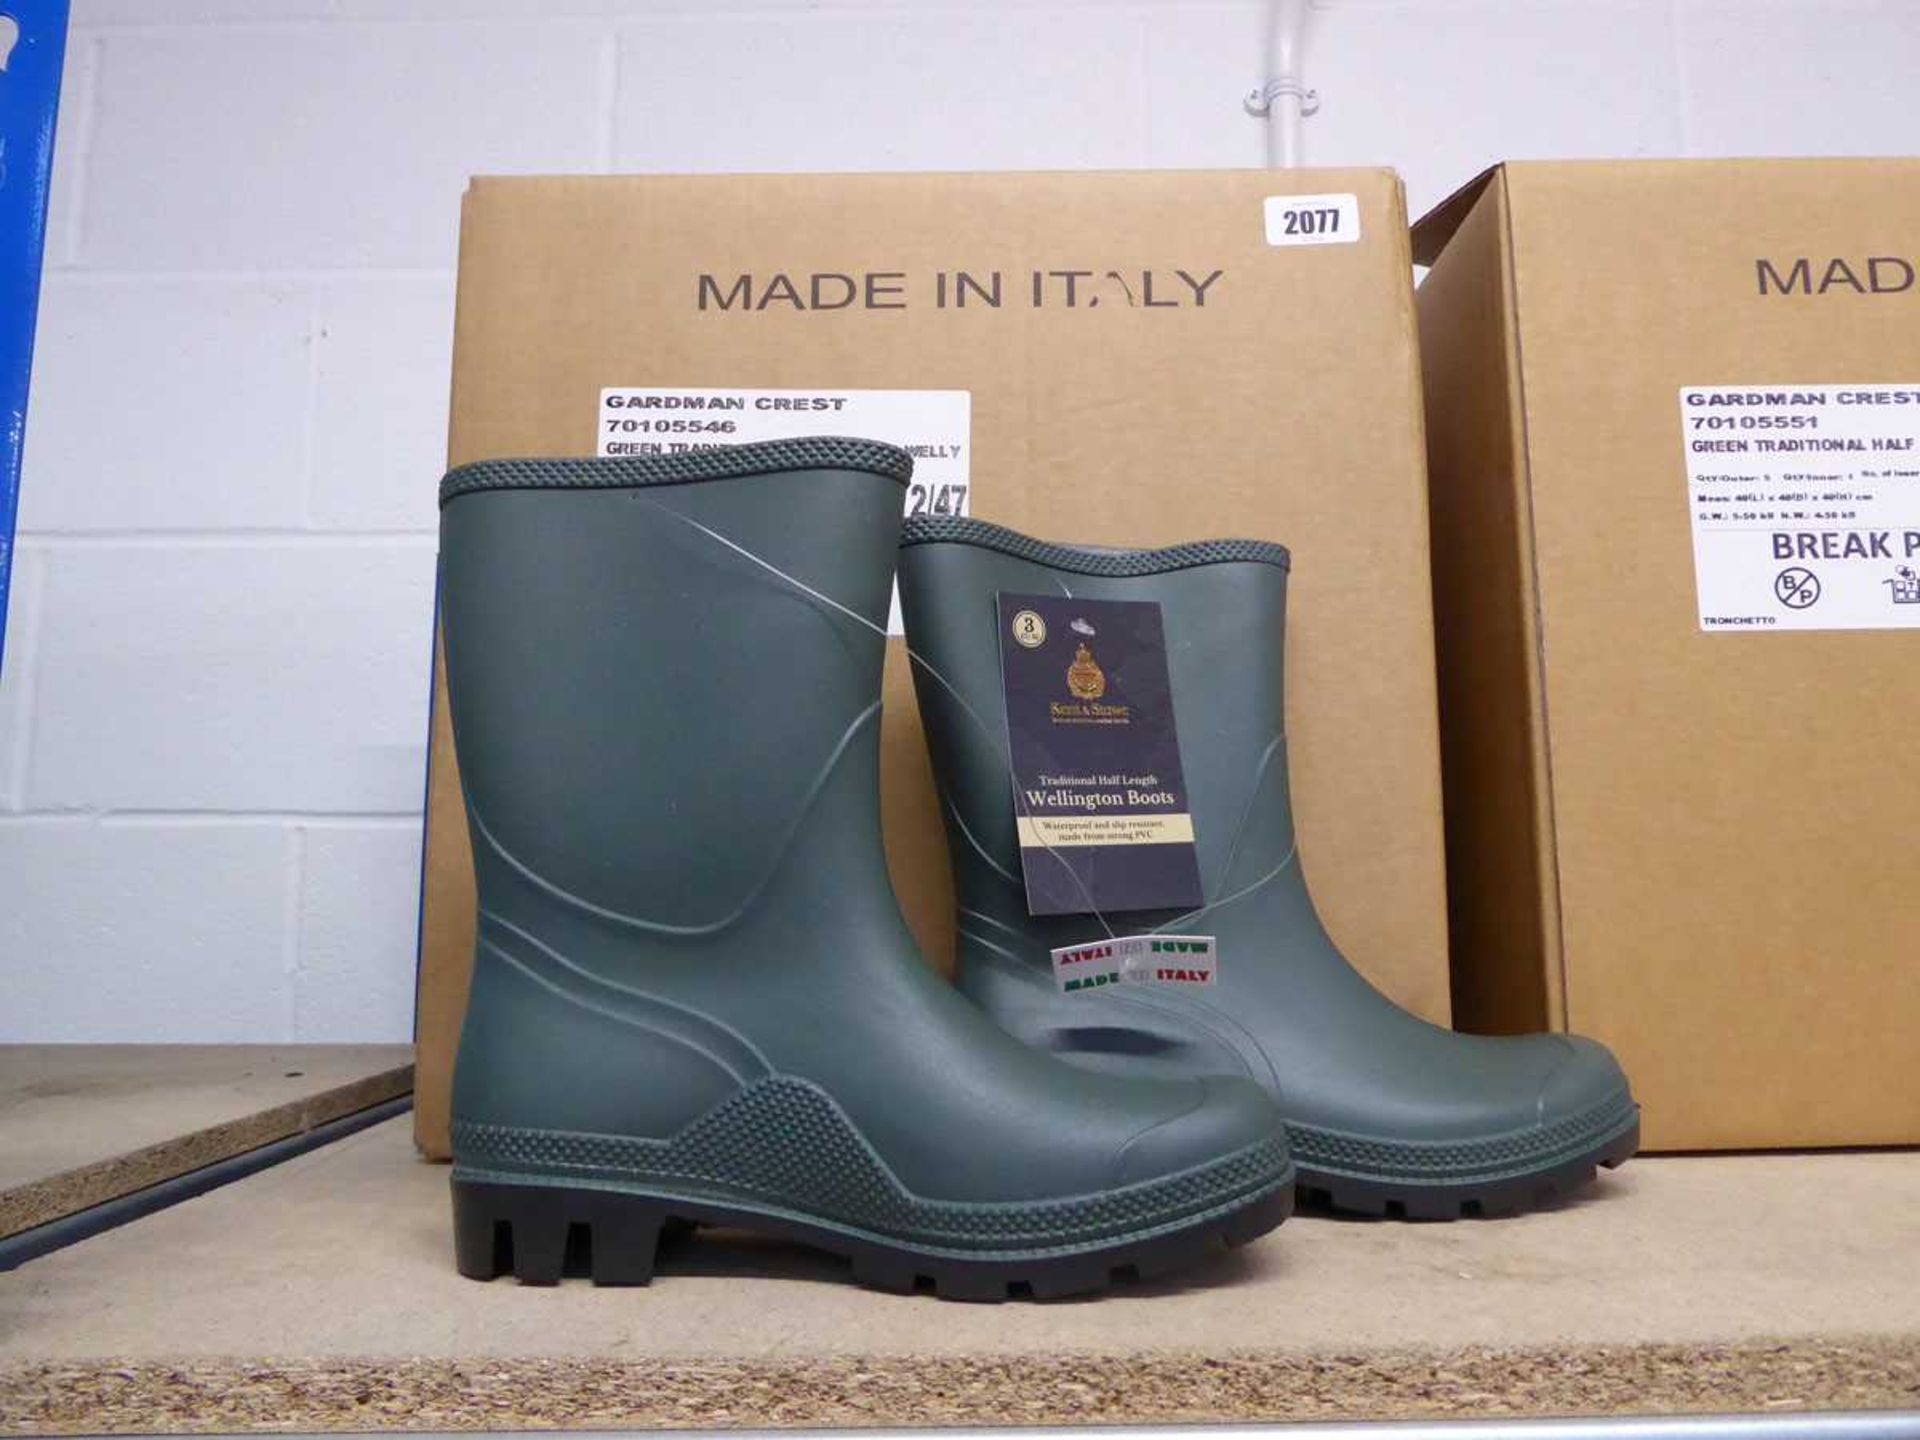 Box containing 5 pairs of Kent & Stowe green traditional gull length Wellington boots (size 12)